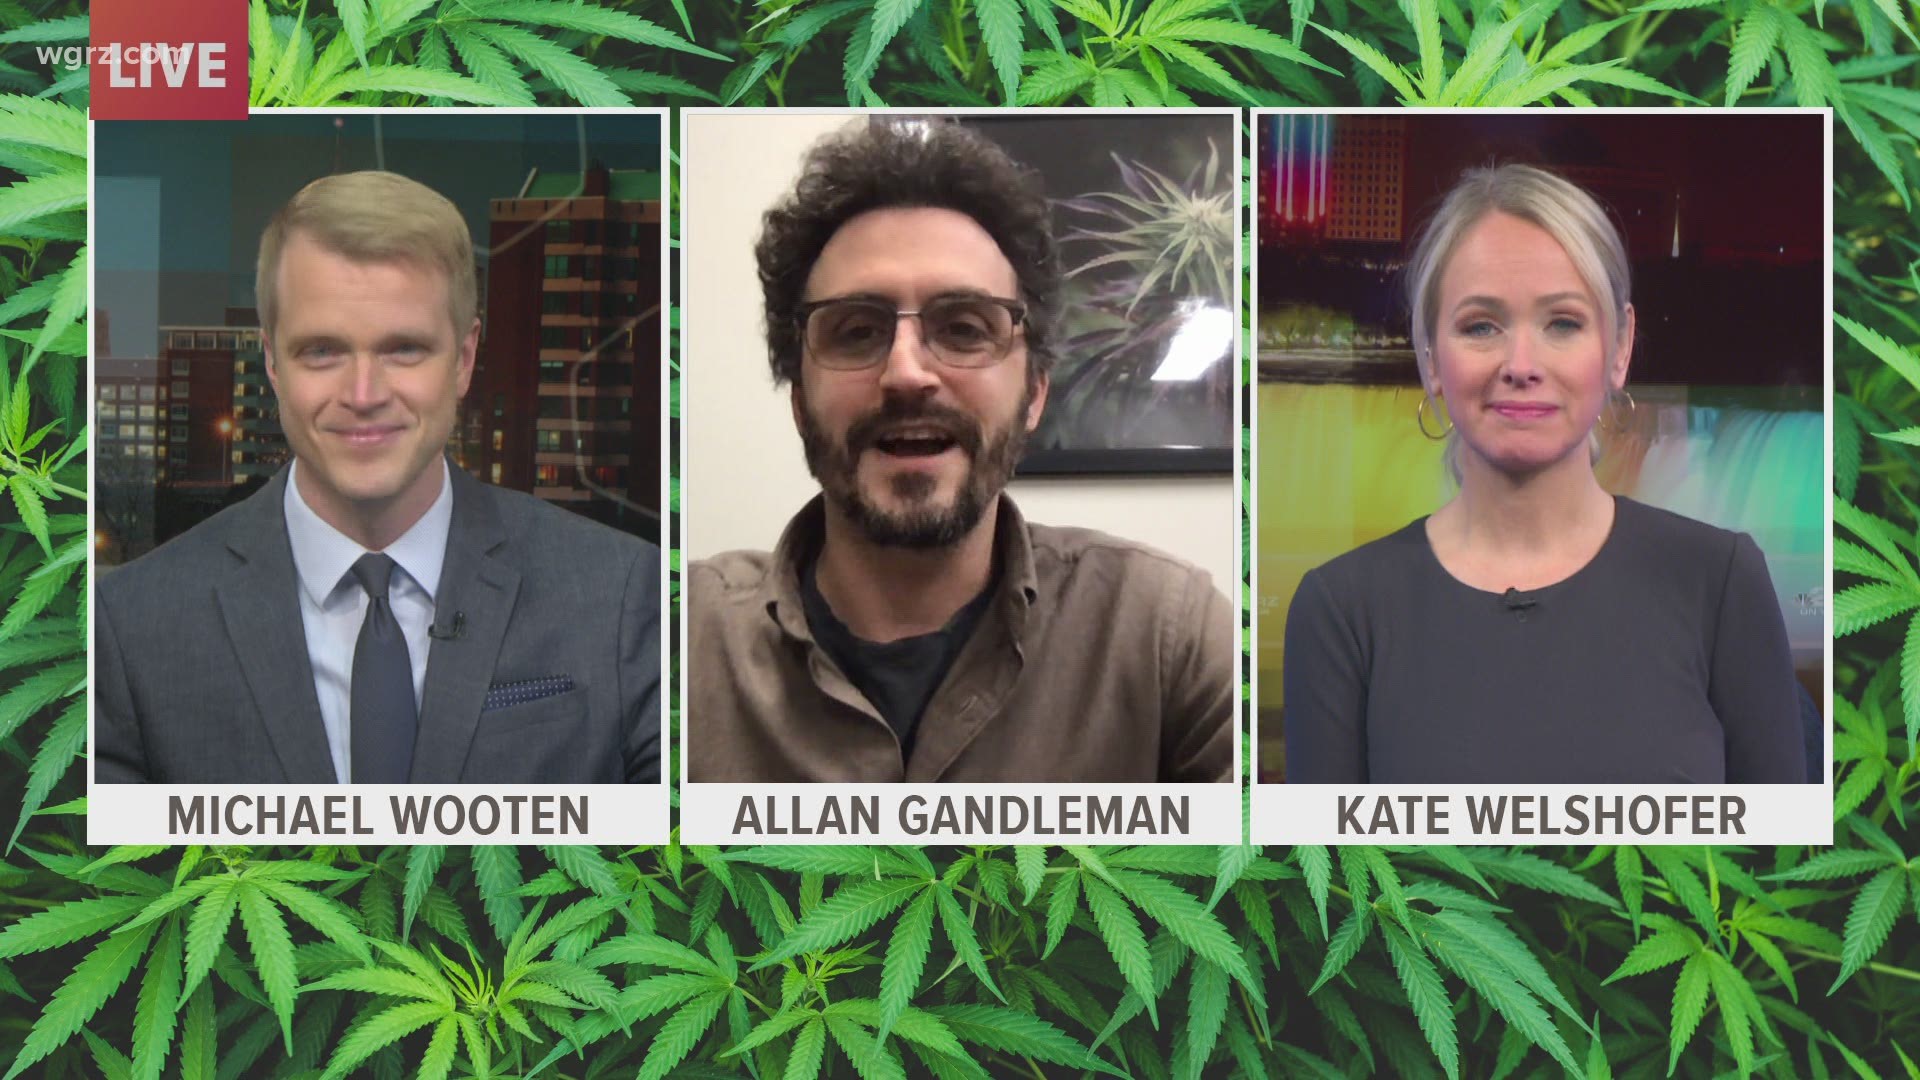 Allan Gandelman president of the New York Annabis Growers & Processors Association joins our town hall to discuss the possible legalization of recreational Marijuana